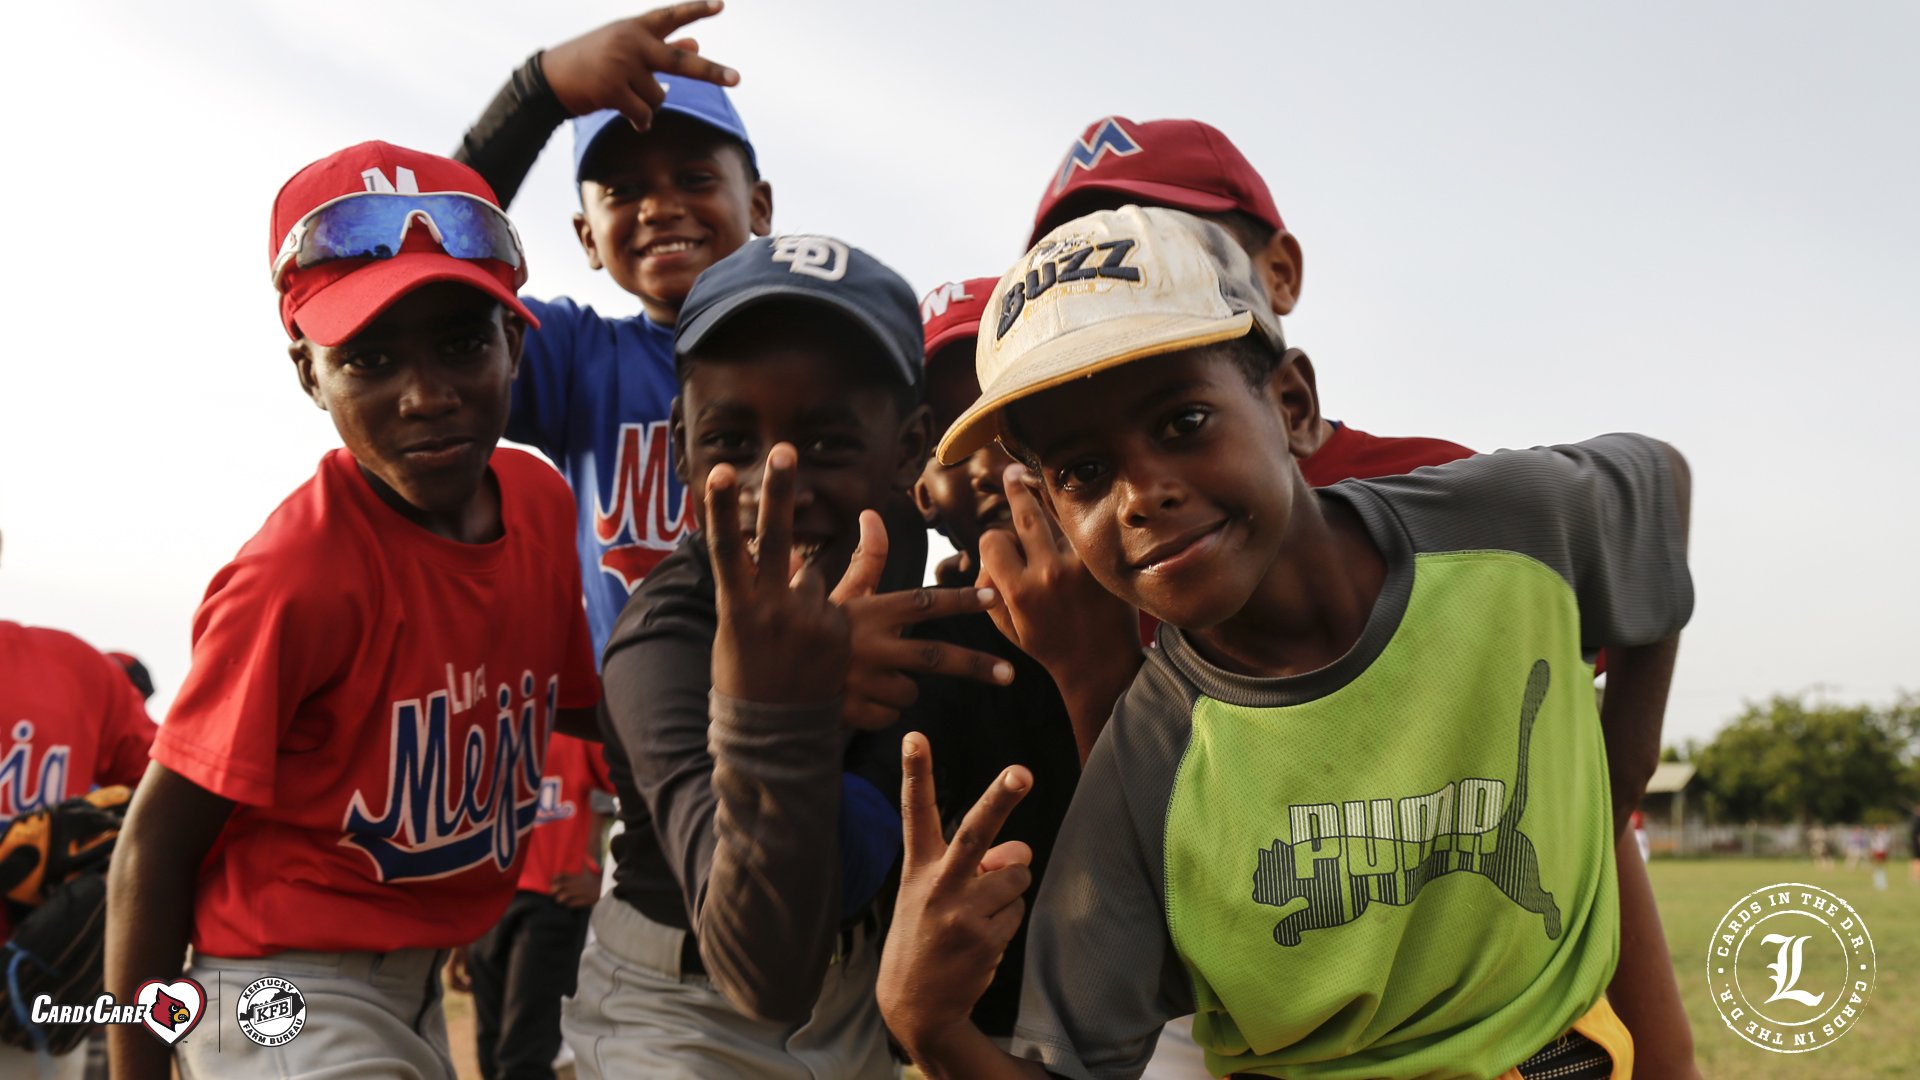 UofL Baseball goes to the Dominican Republic for games and community service